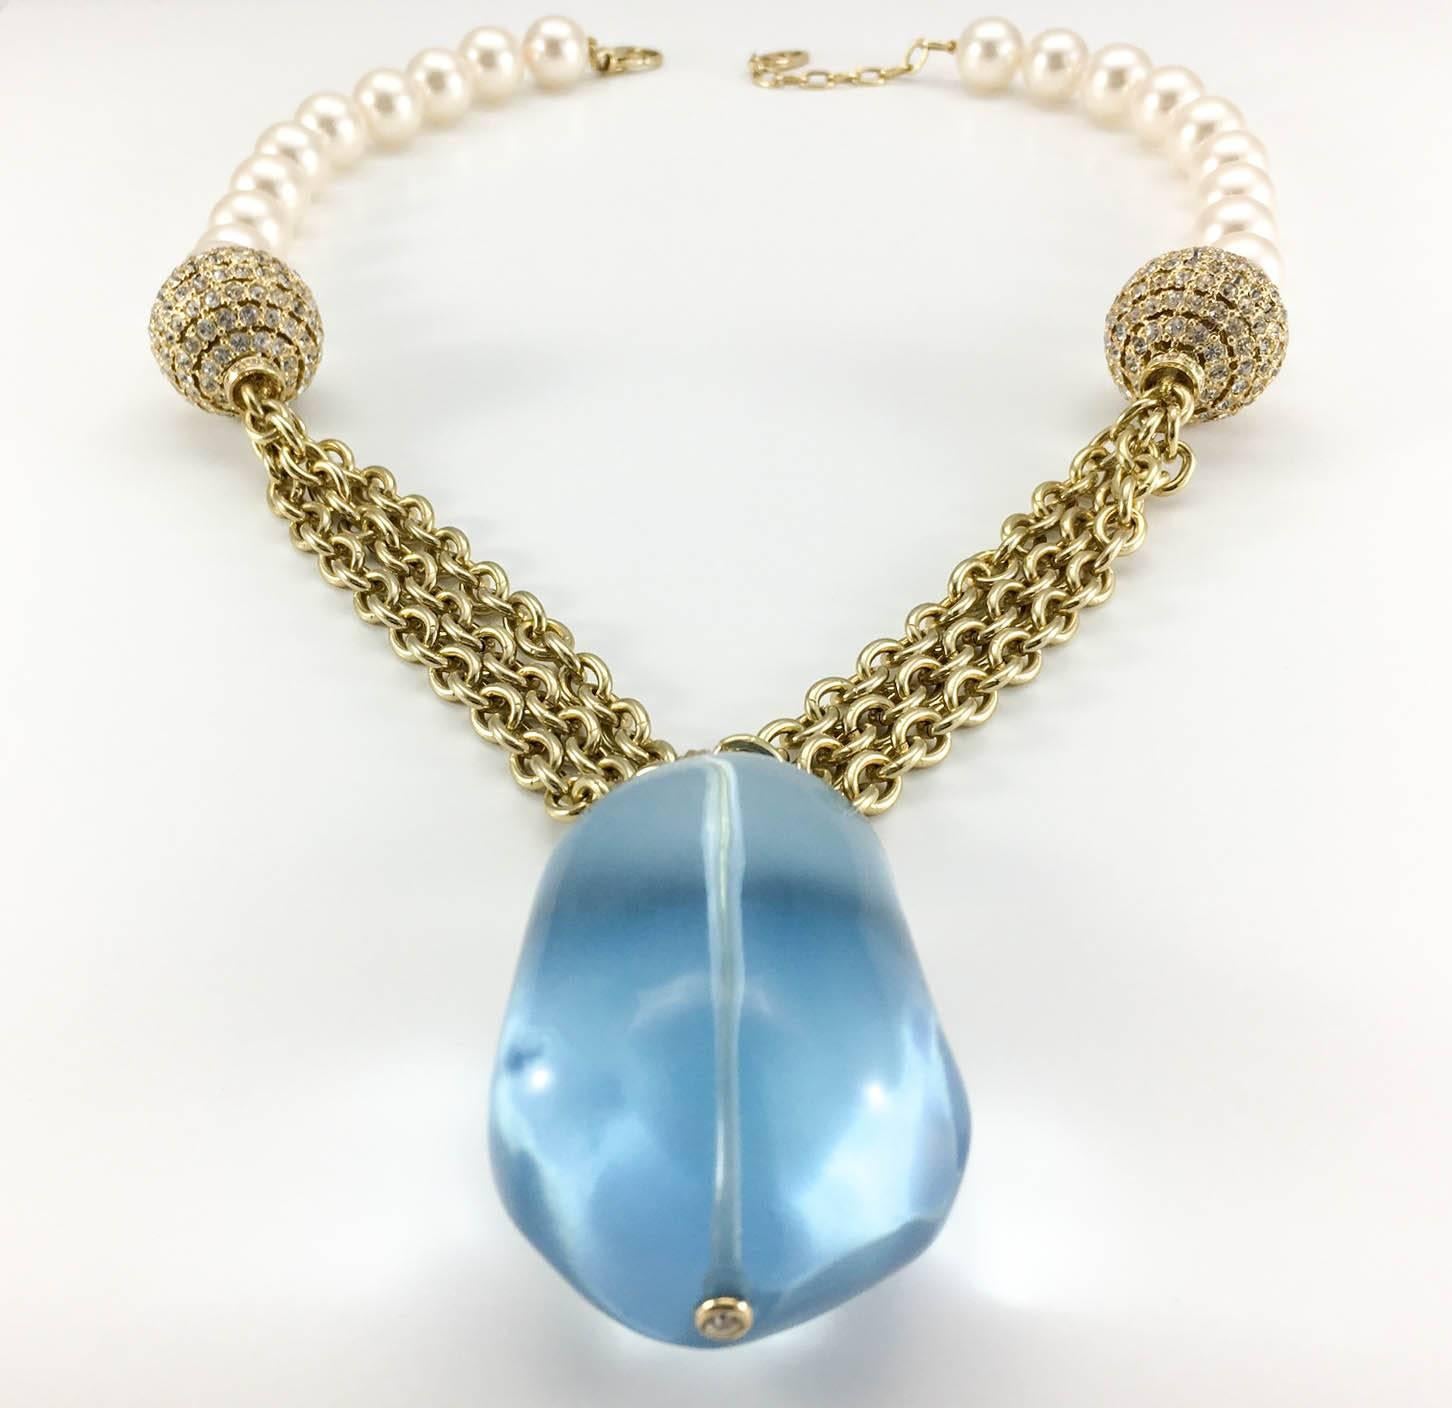 Striking Valentino Necklace. This Valentino creation is certainly a statement piece. It features a large pale blue transparent resin pendant, the necklace itself is made half in glass pearls and the other half in gold-tone chains, with a rhinestone